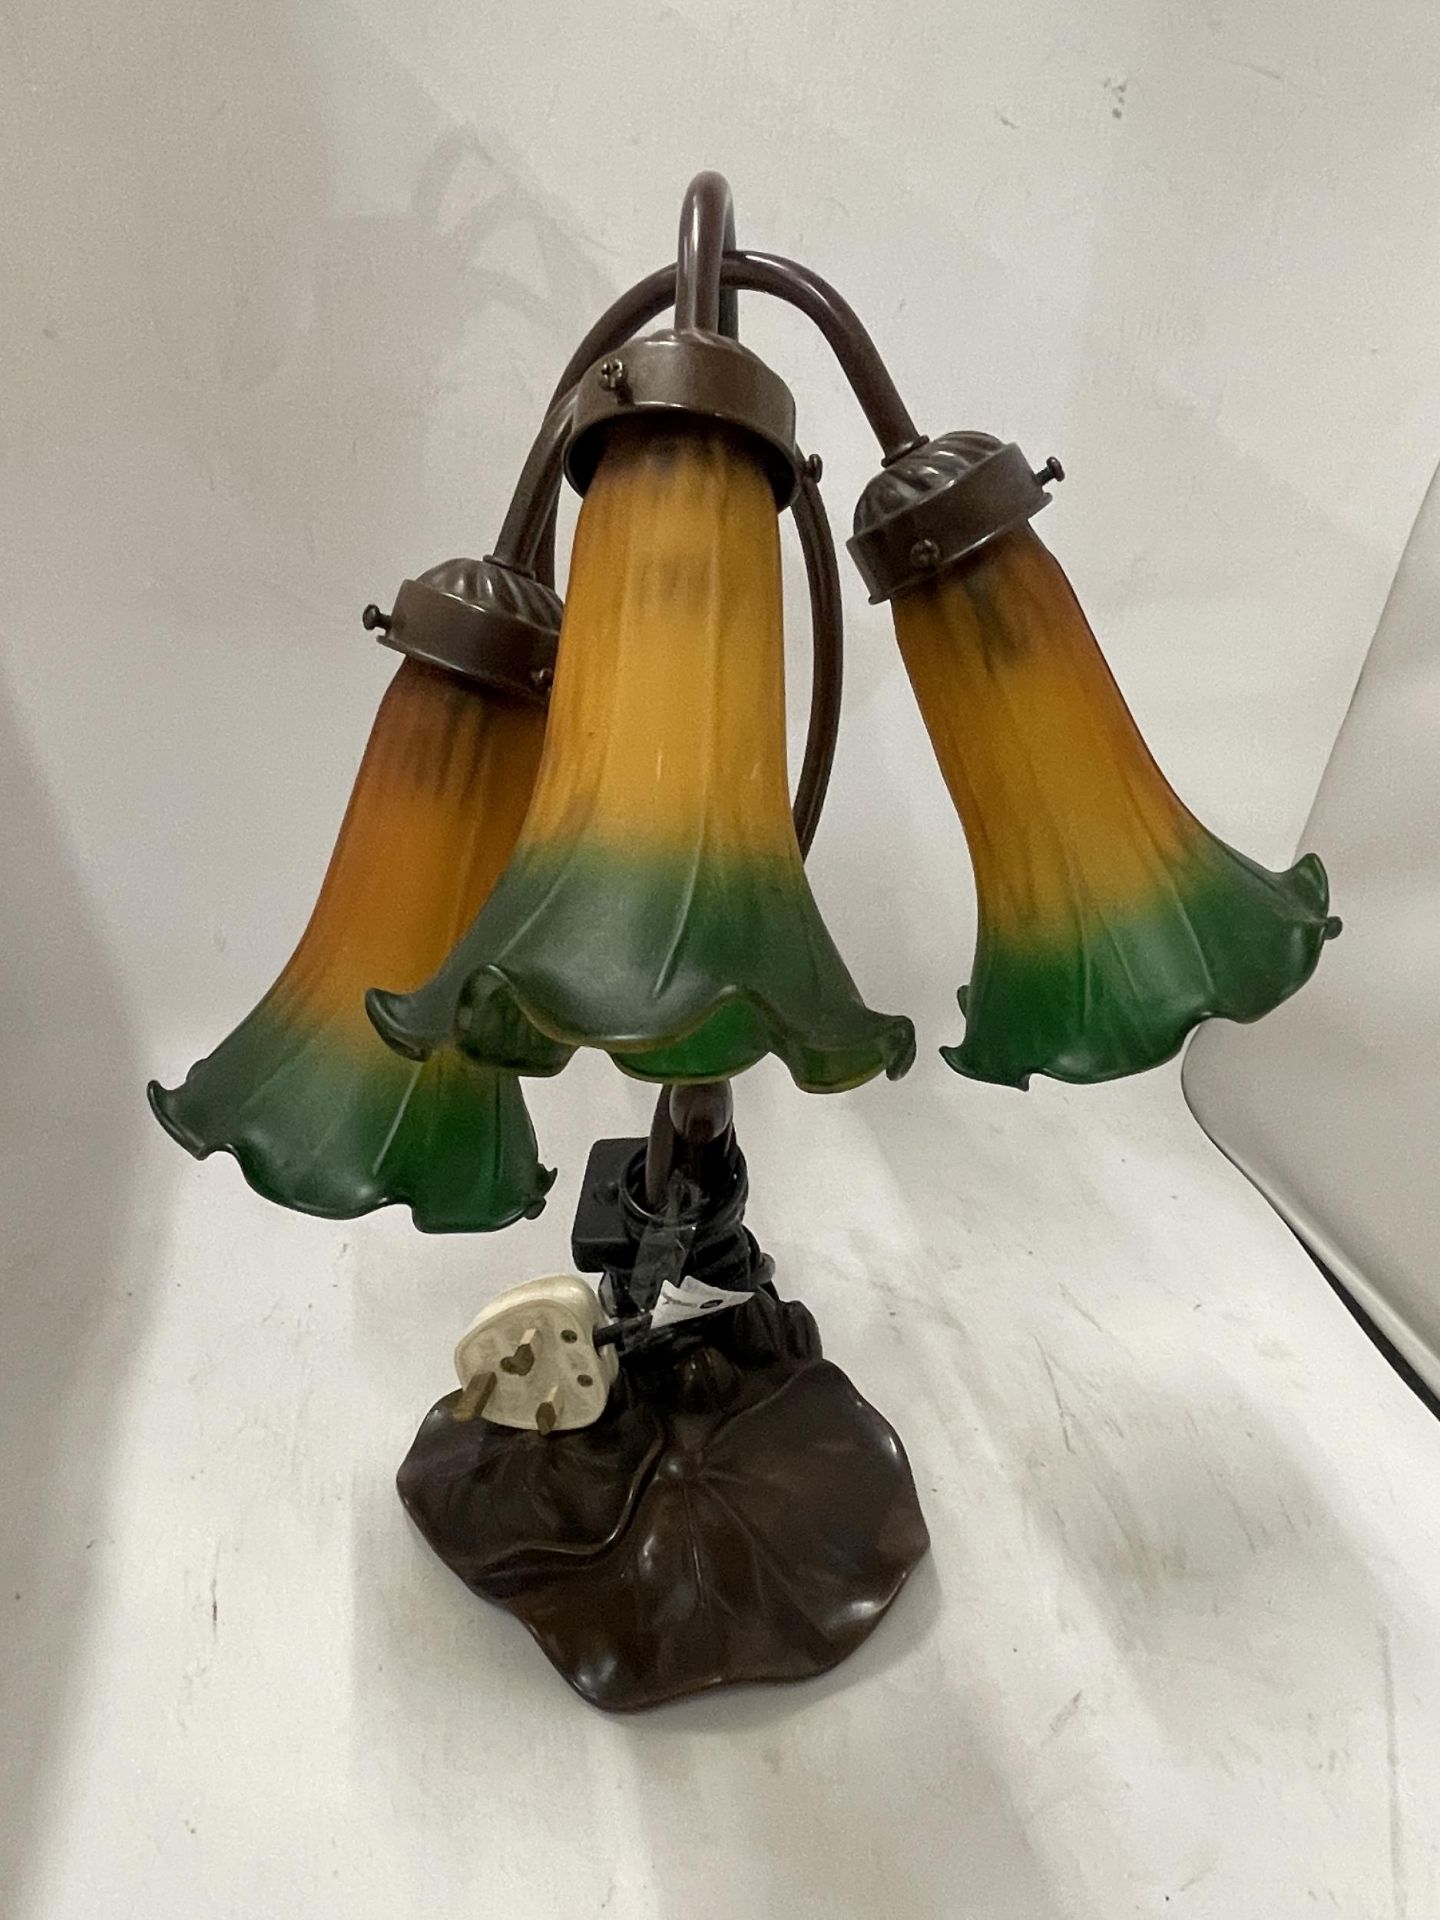 A VINTAGE TIFFANY STYLE LAMP WITH THREE FROSTED GLASS SHADES